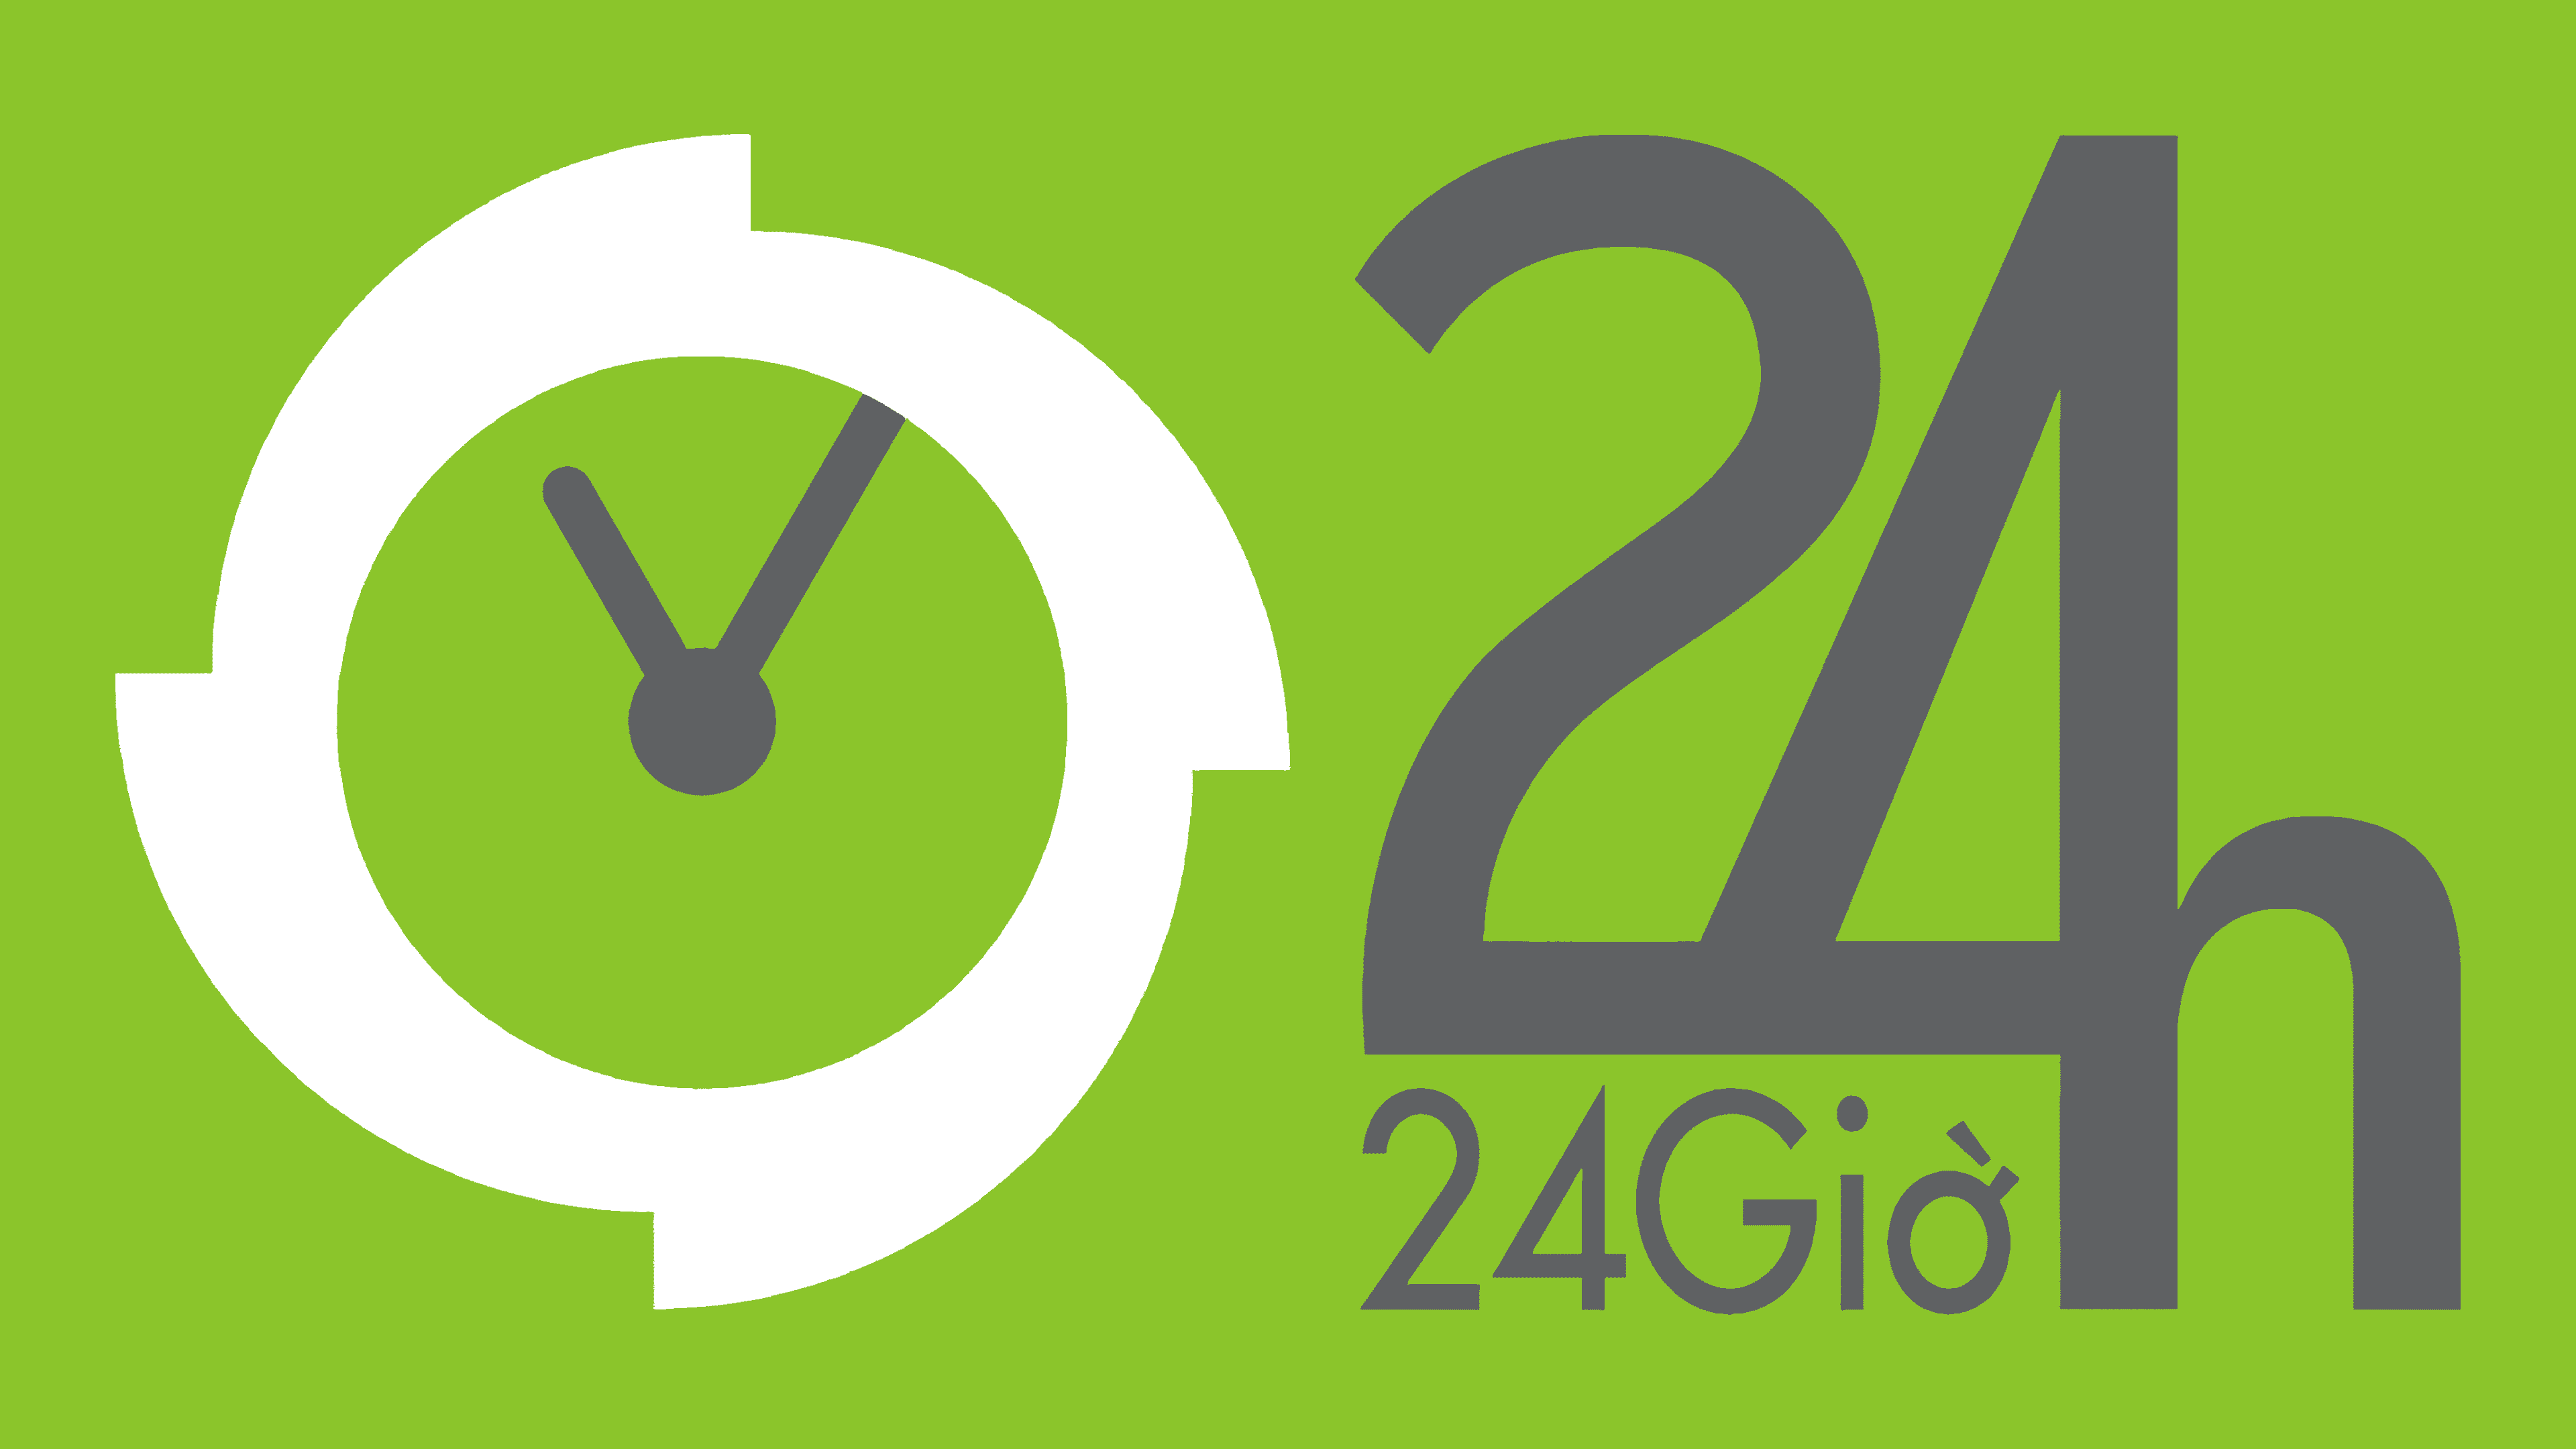 24h com vn Logo, symbol, meaning, history, PNG, brand